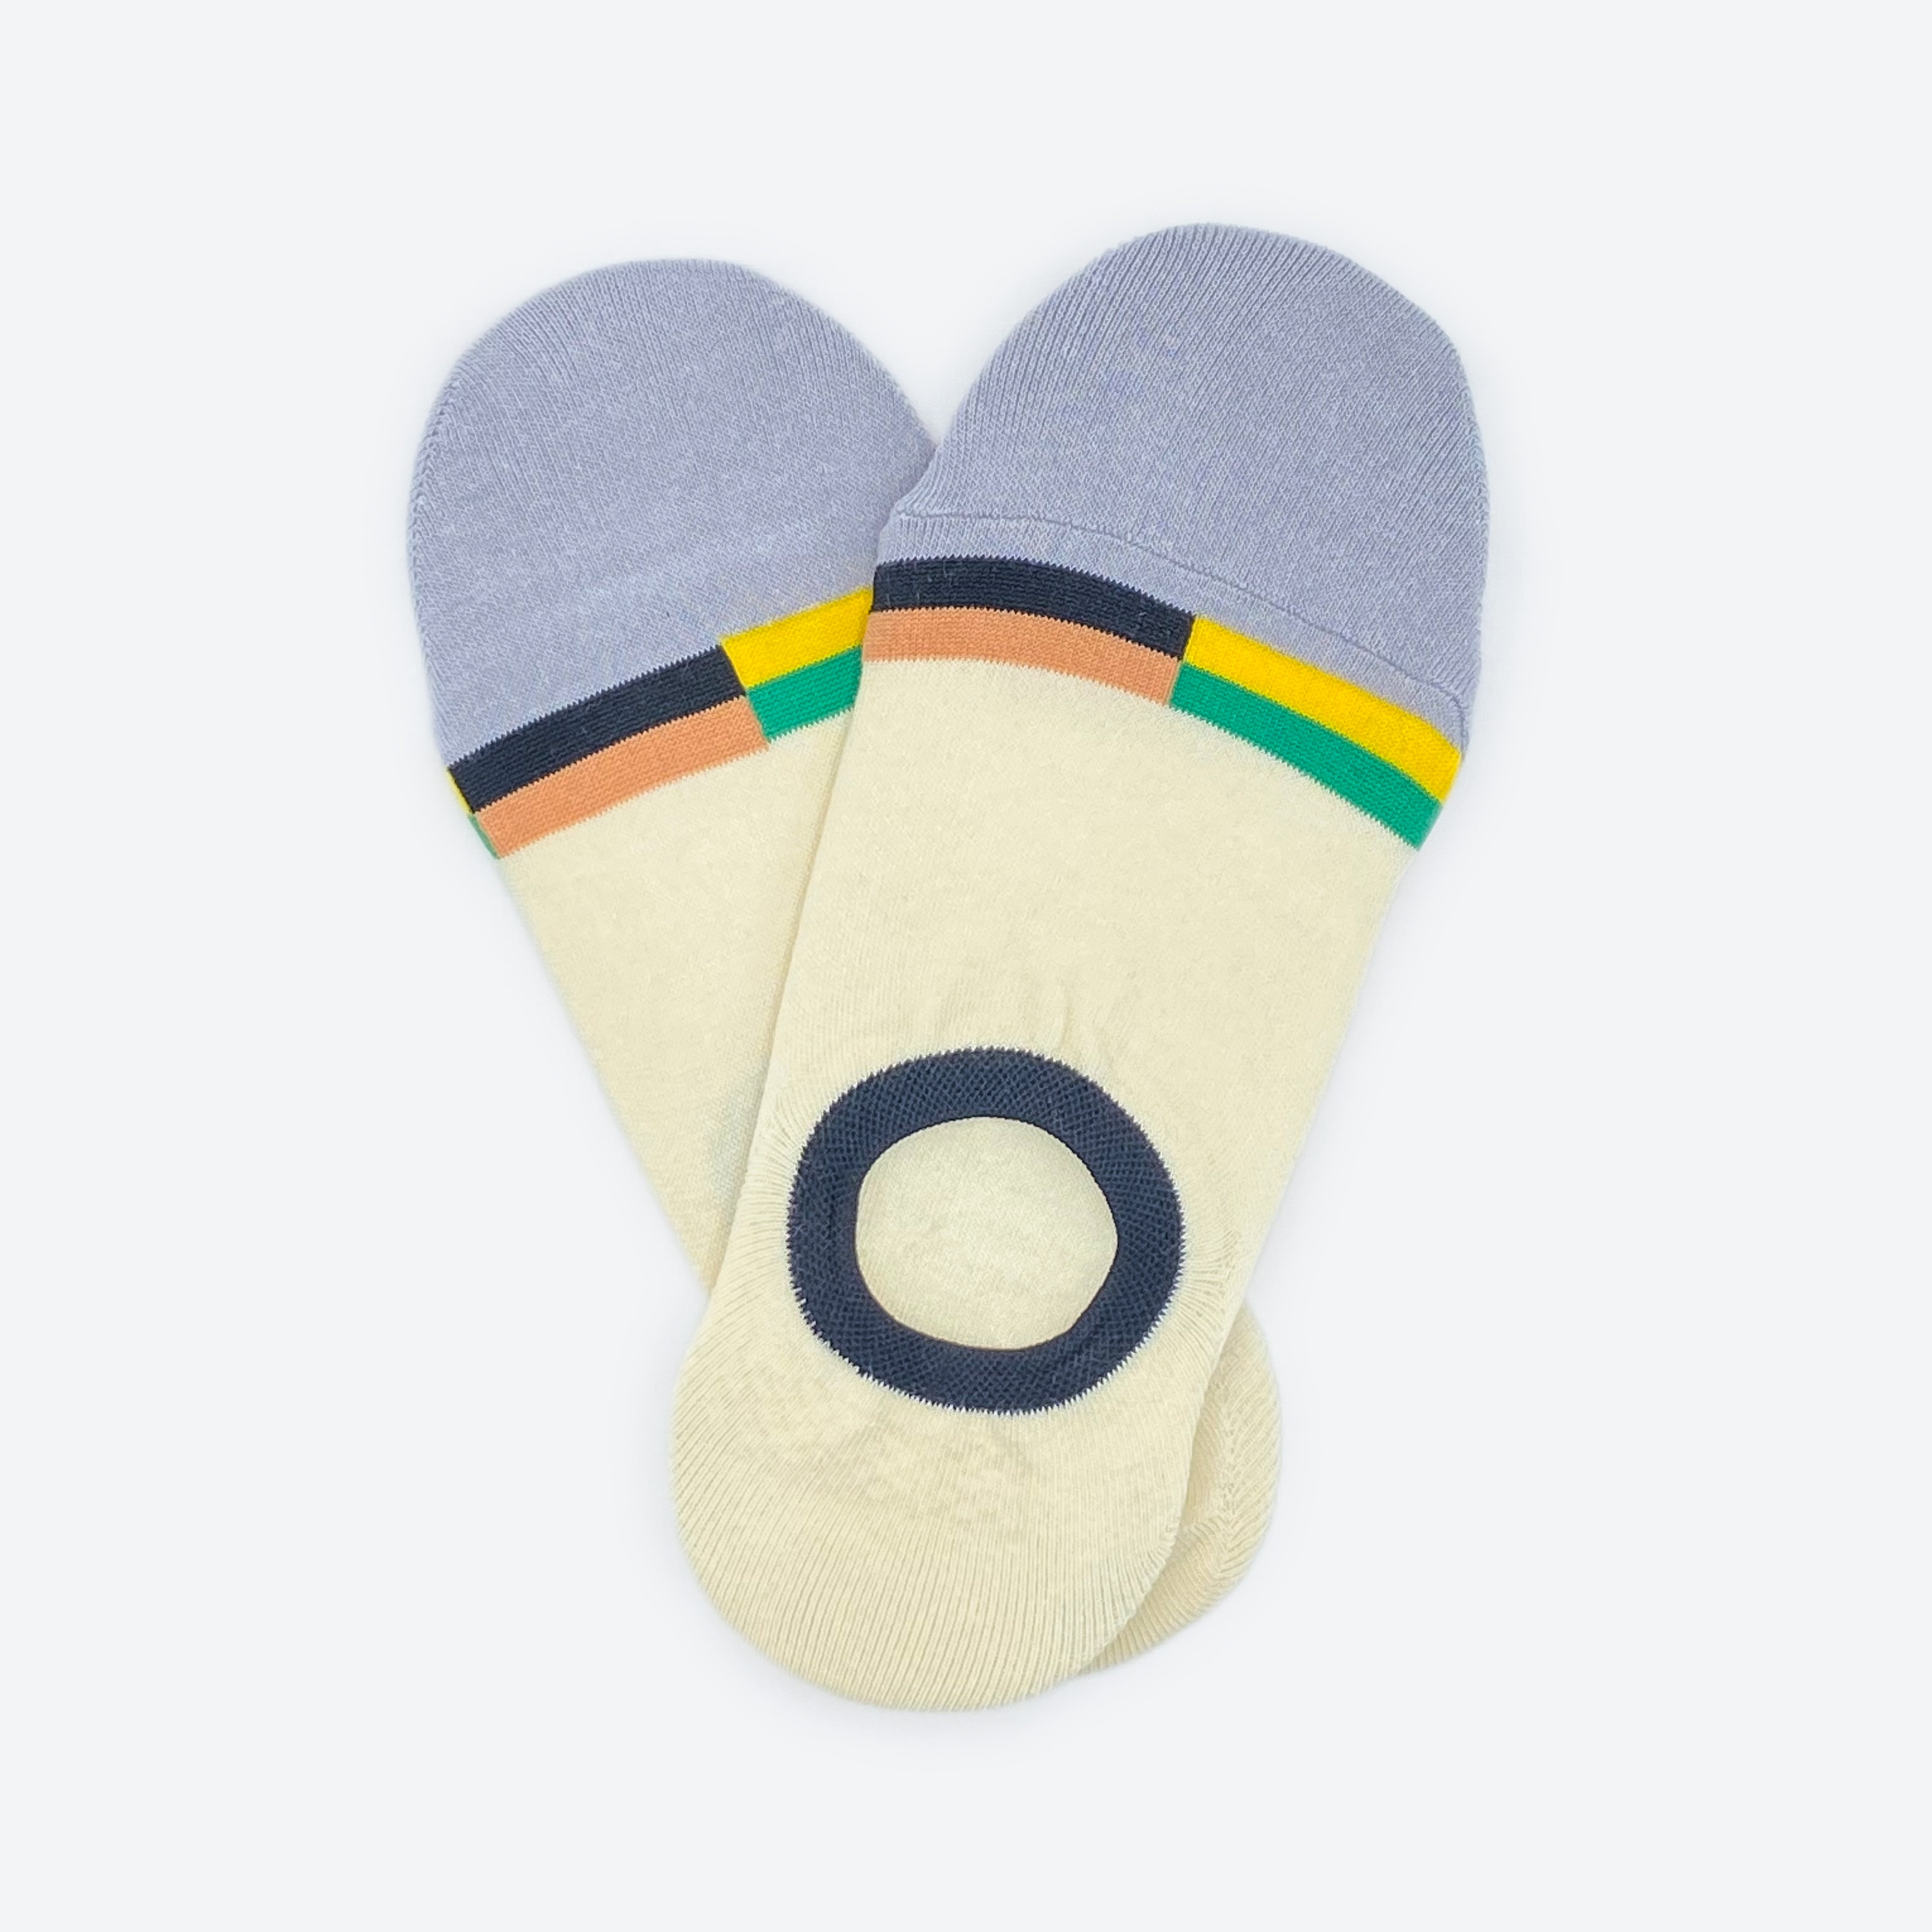 Hooray Sock Co. Marina No Show Socks. Lightweight, minimal, perfect for hot weather. Heel grips for secure fit. Size: Large (US men’s 8-12), Small (US women's 4-10)